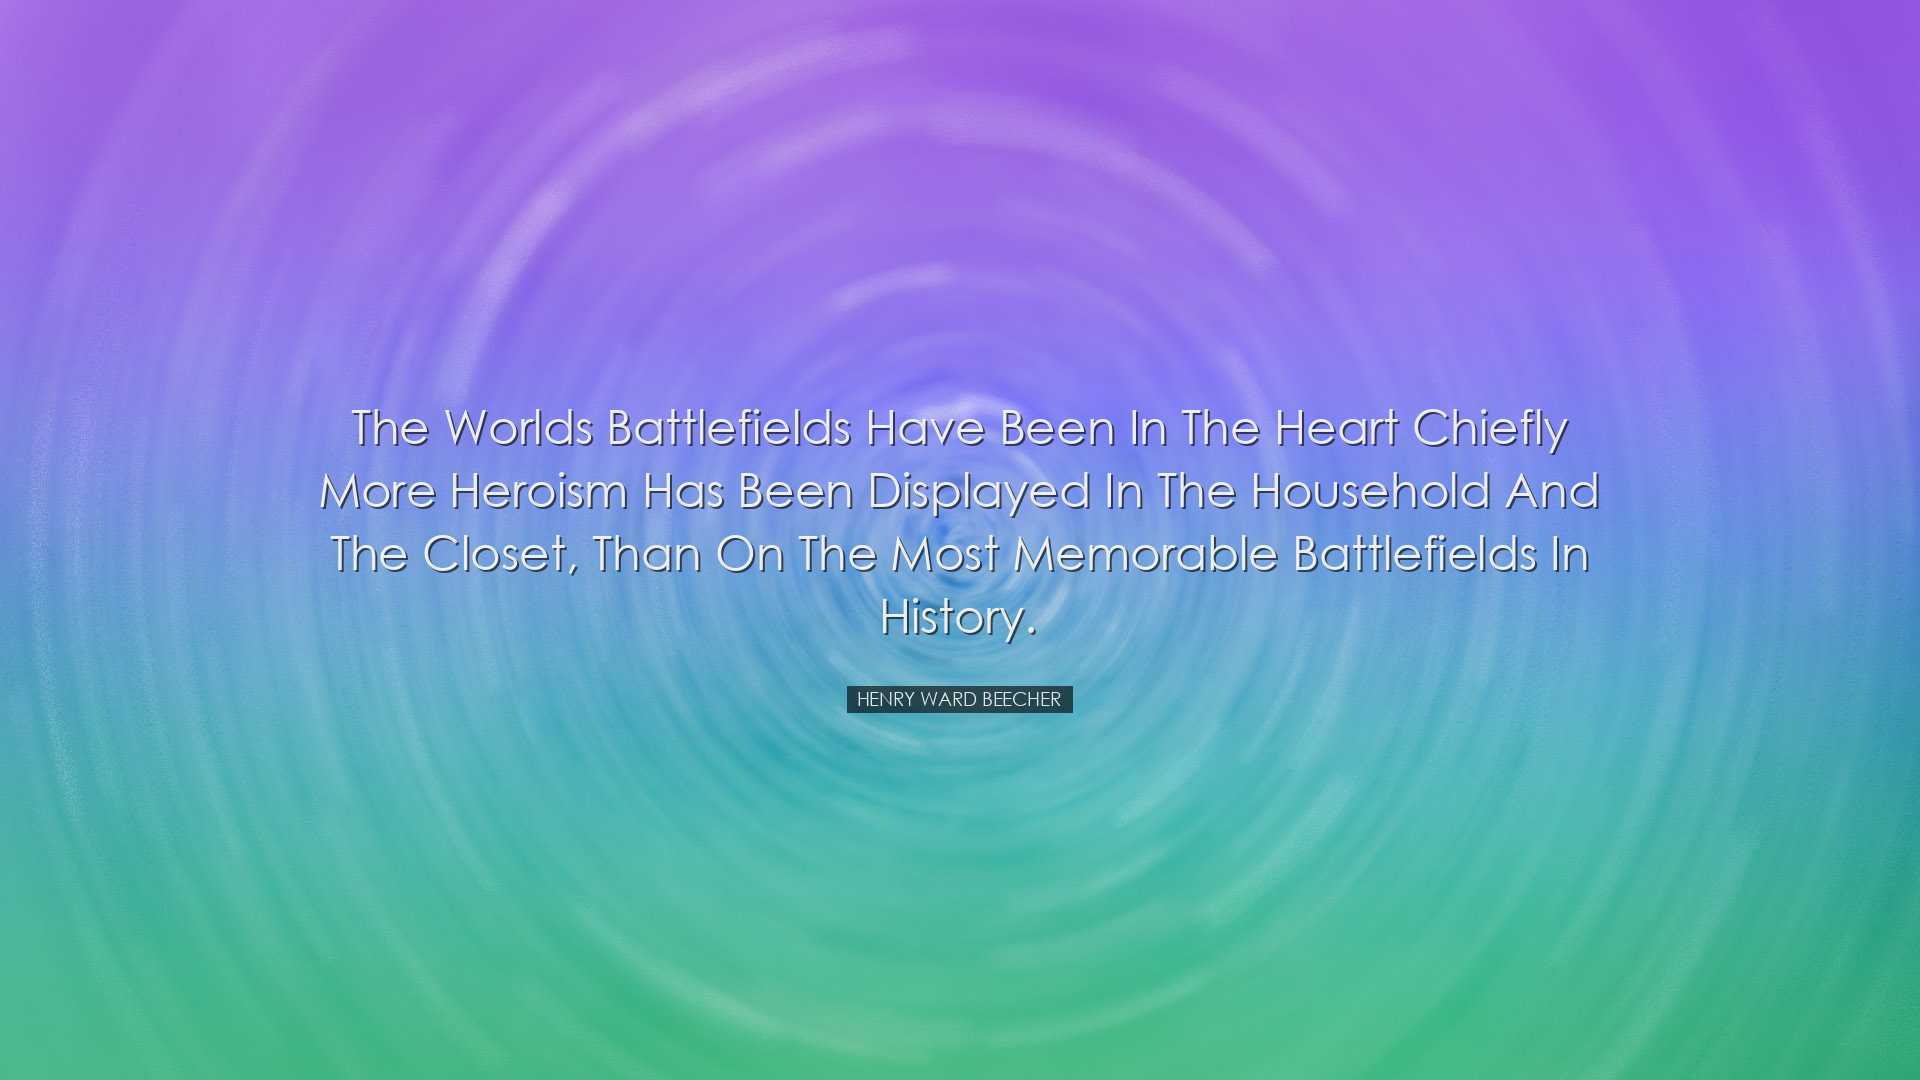 The worlds battlefields have been in the heart chiefly more herois